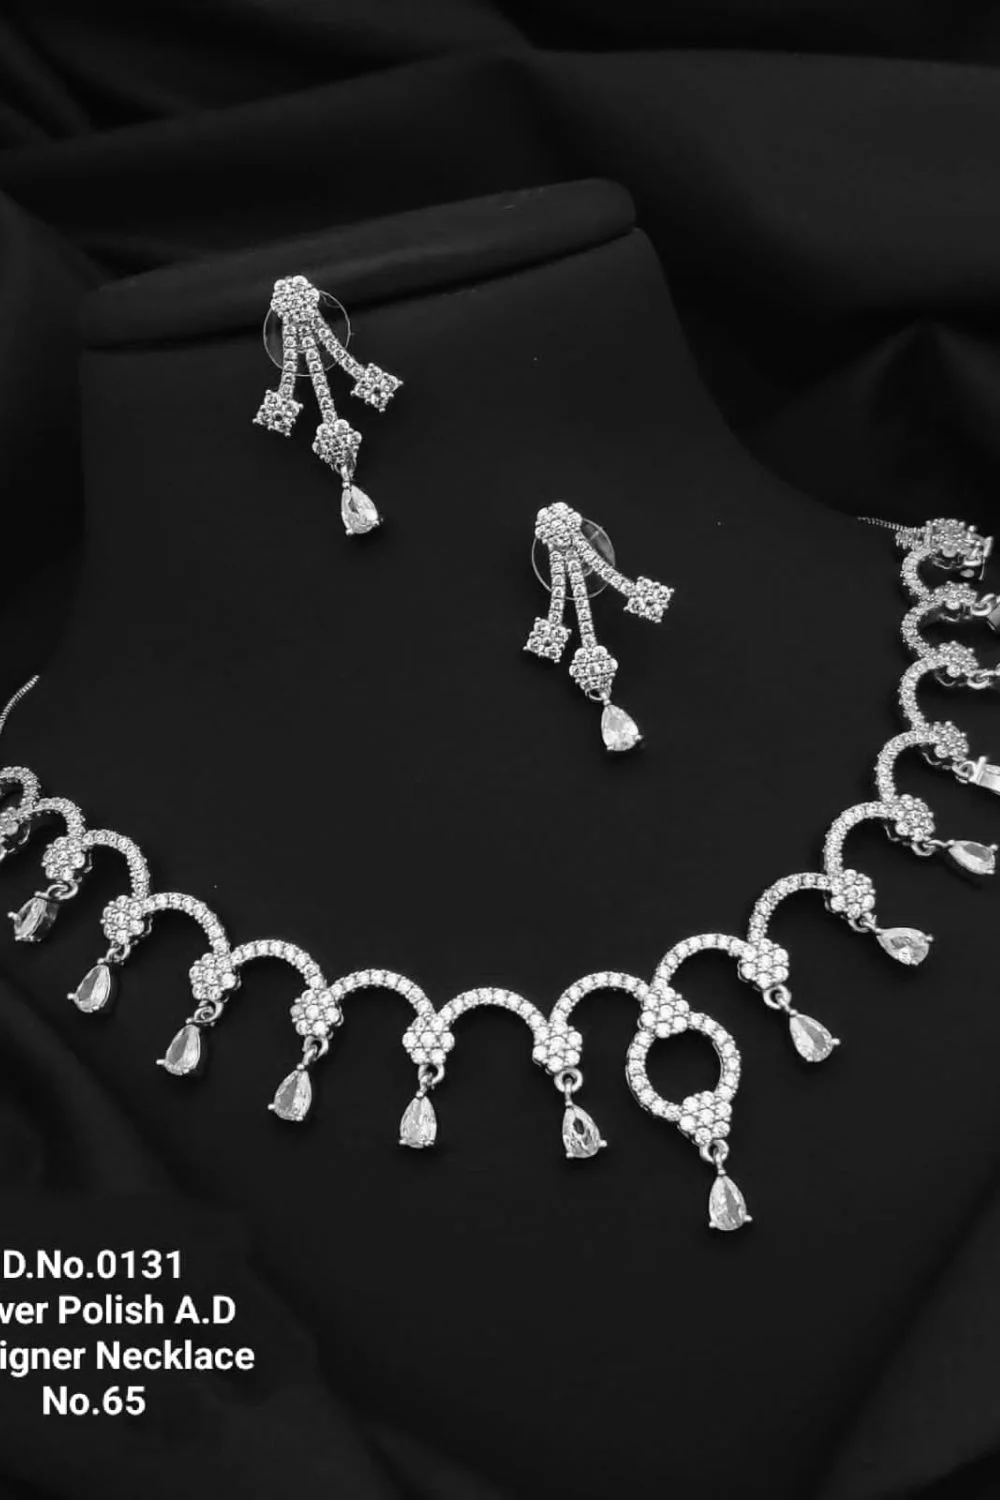 Finest Silver Polished AD Necklace